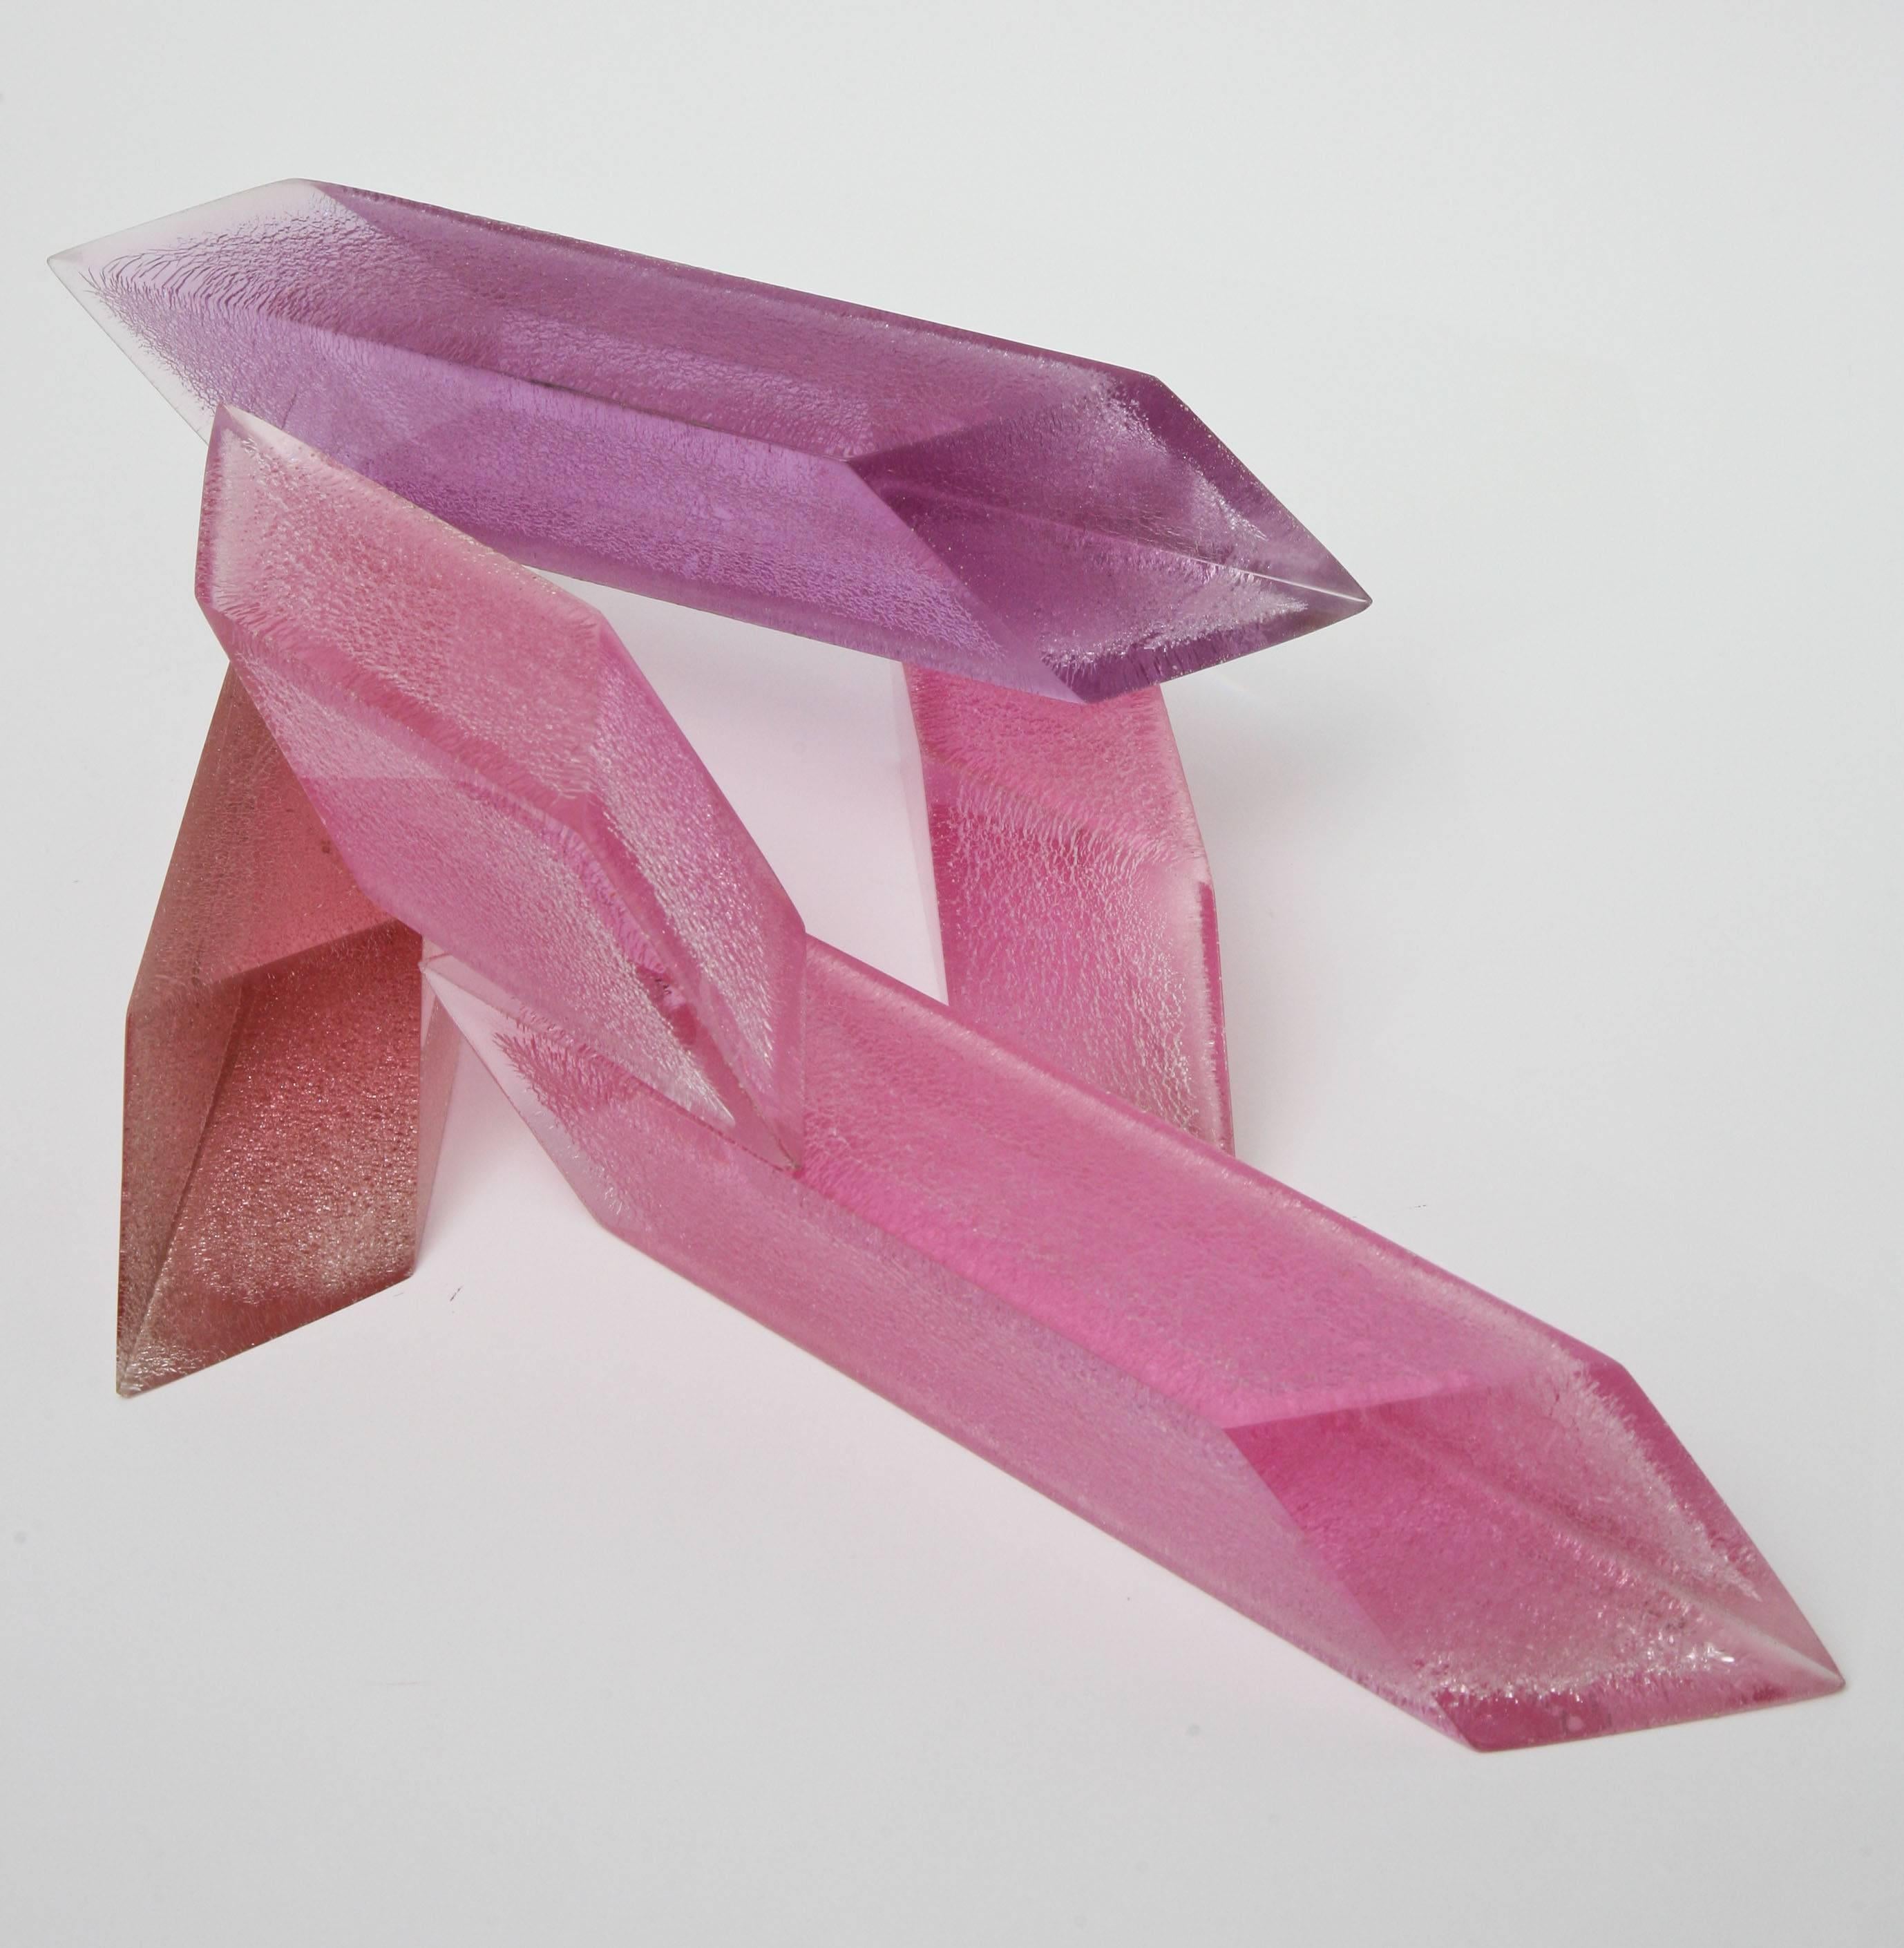 These set of five colored Lucite and crackled sculptures can go into any configuration. They are like angled and thick pick up sticks.
They have been attributed to Norman Mercer.
The colors are three pink, one purple and one peach. They have an